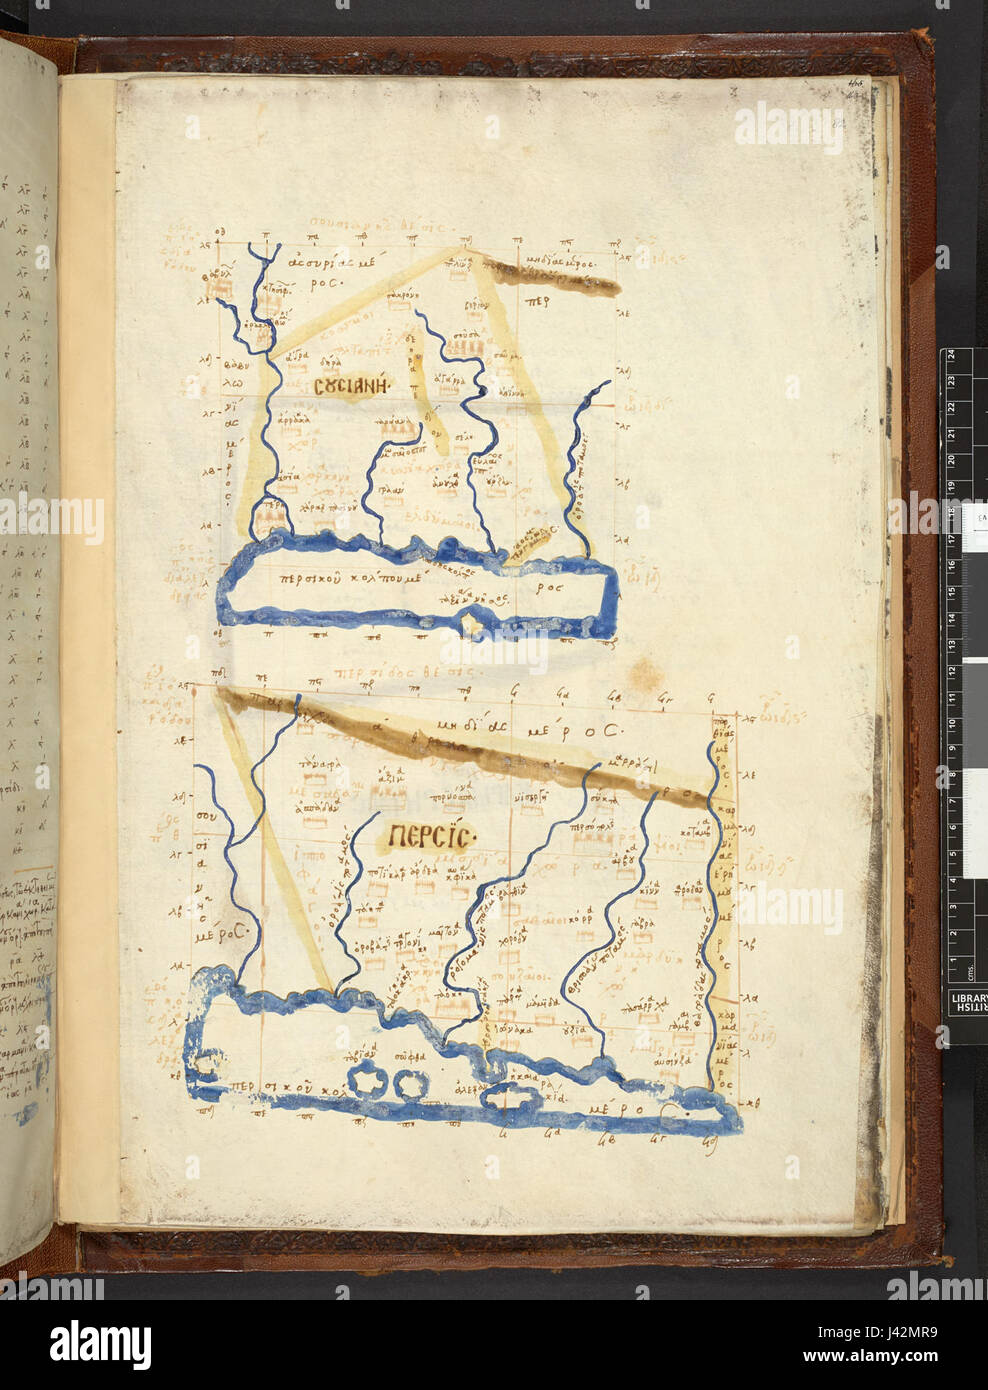 Map after Ptolemy's Geographia (Burney MS 111, f.82r) Stock Photo